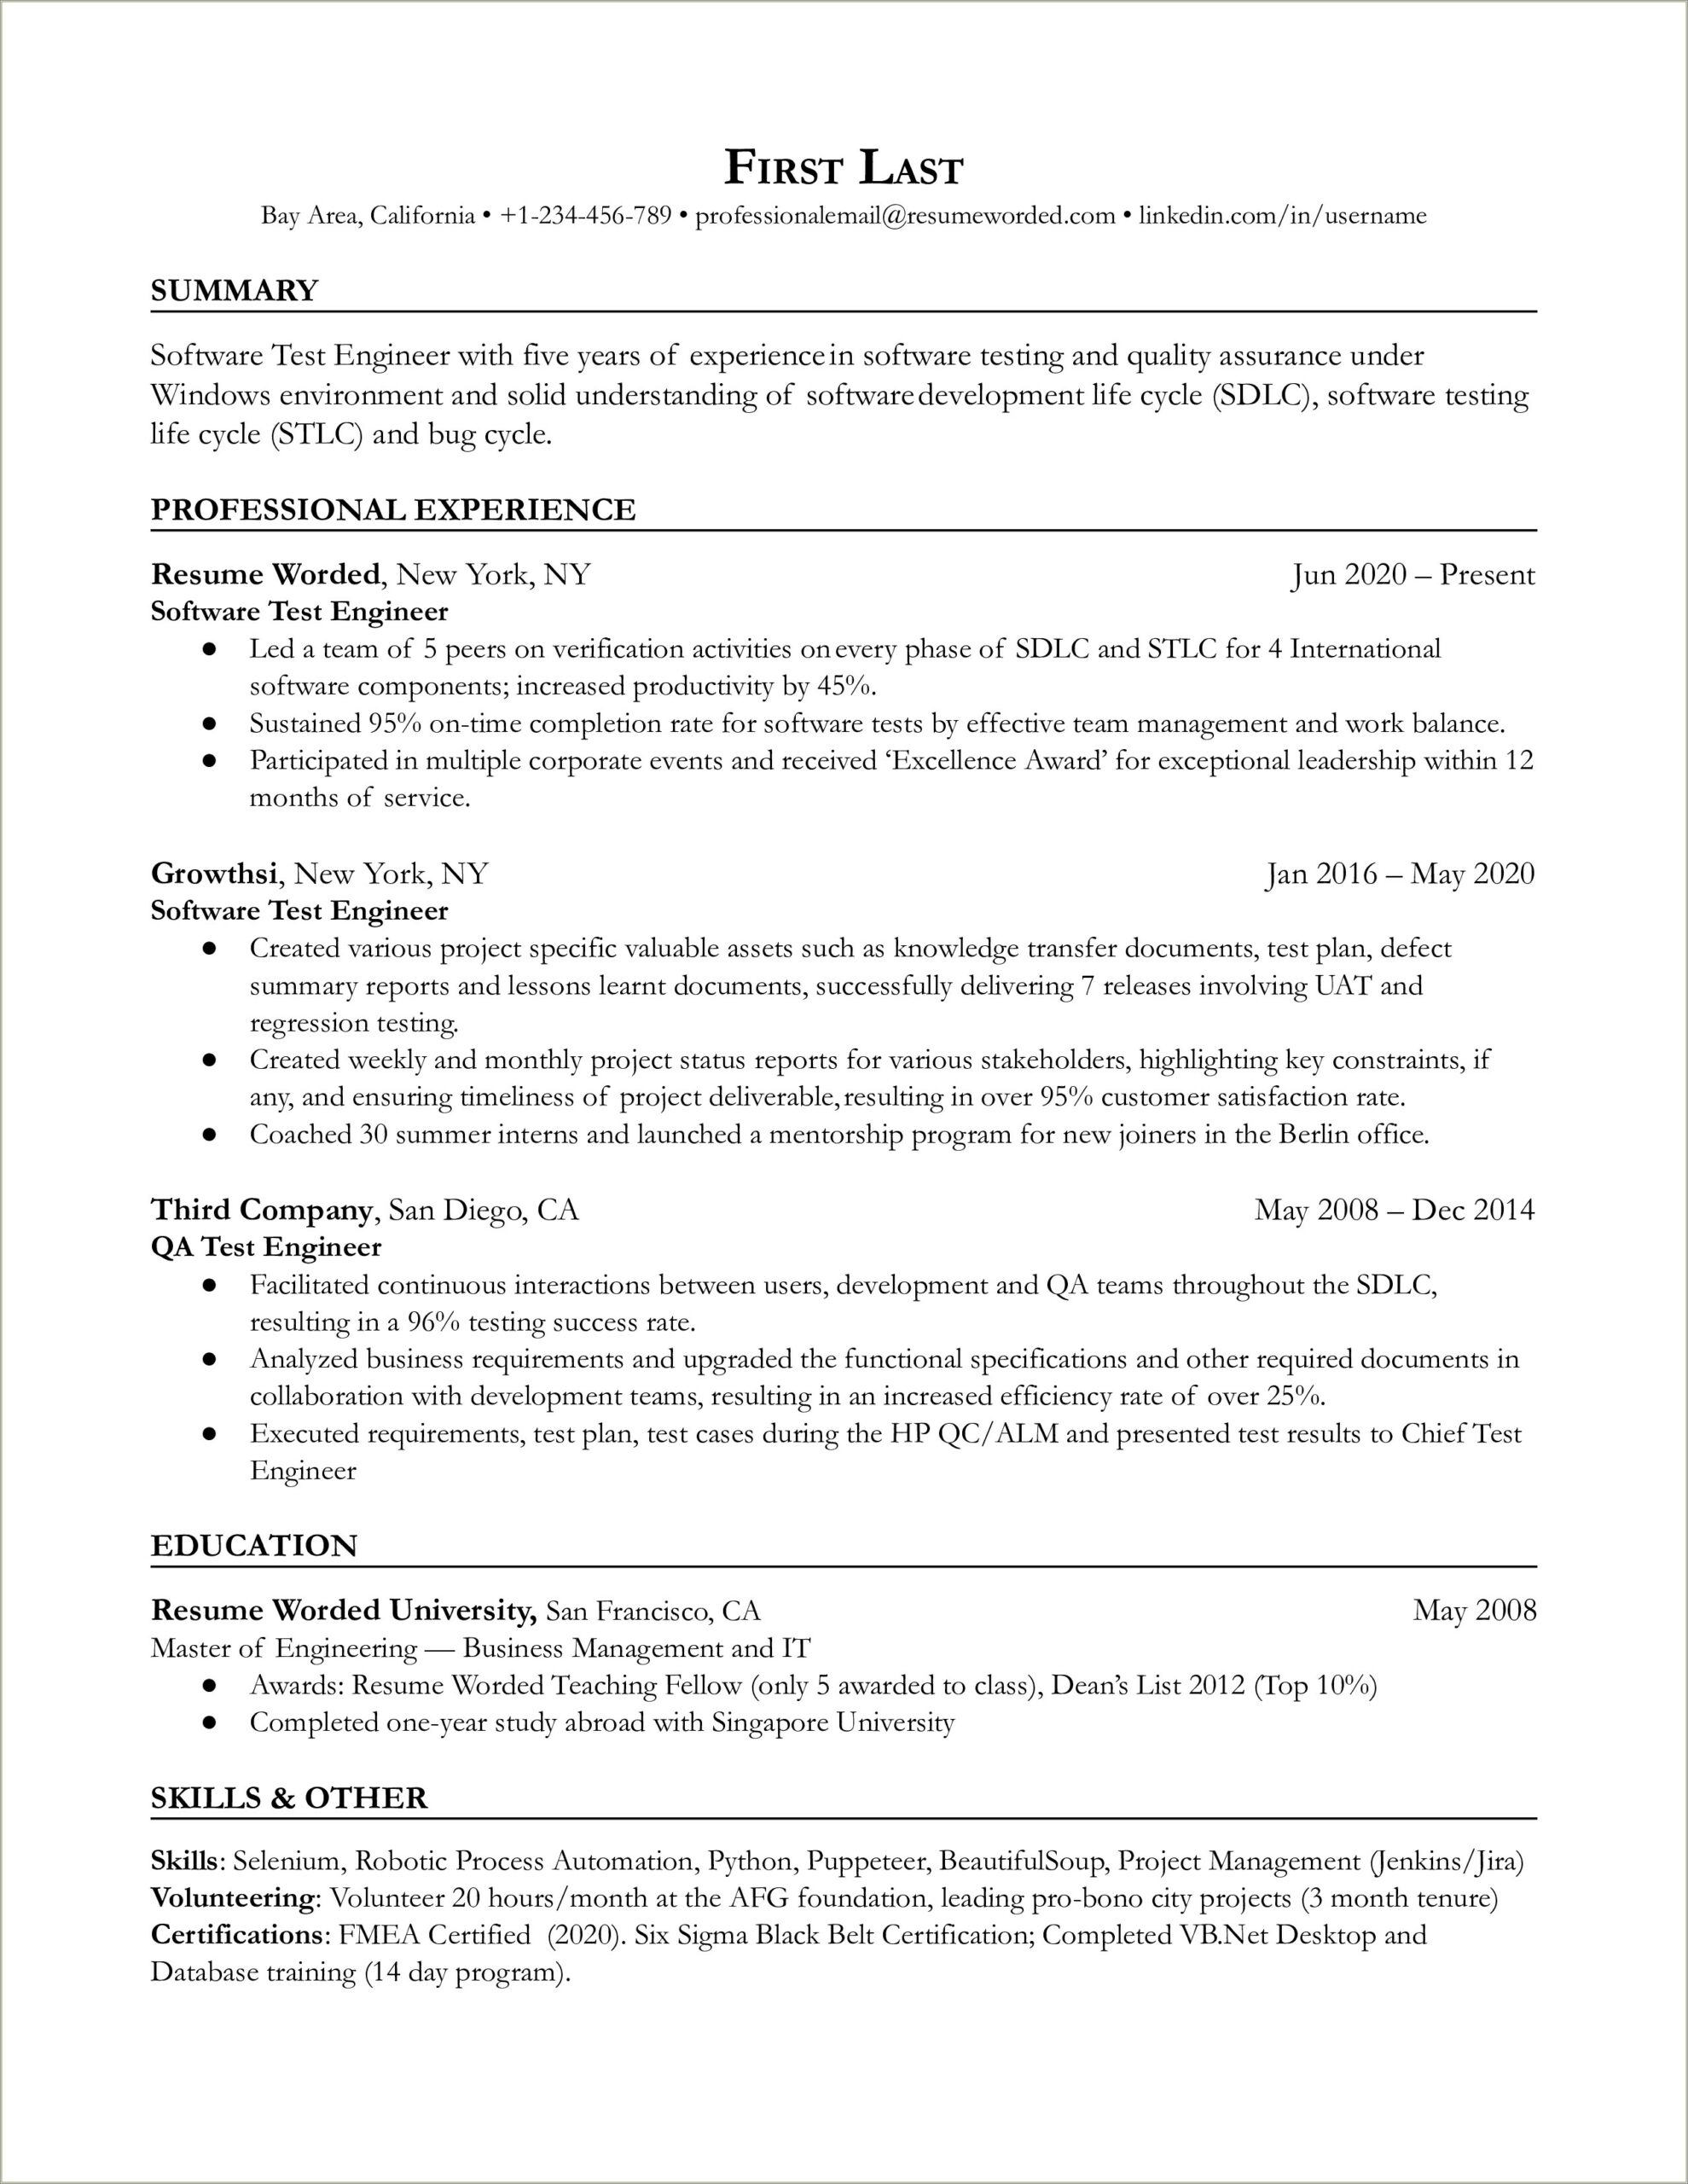 Resumes For Engineers With Multiple Years Experience